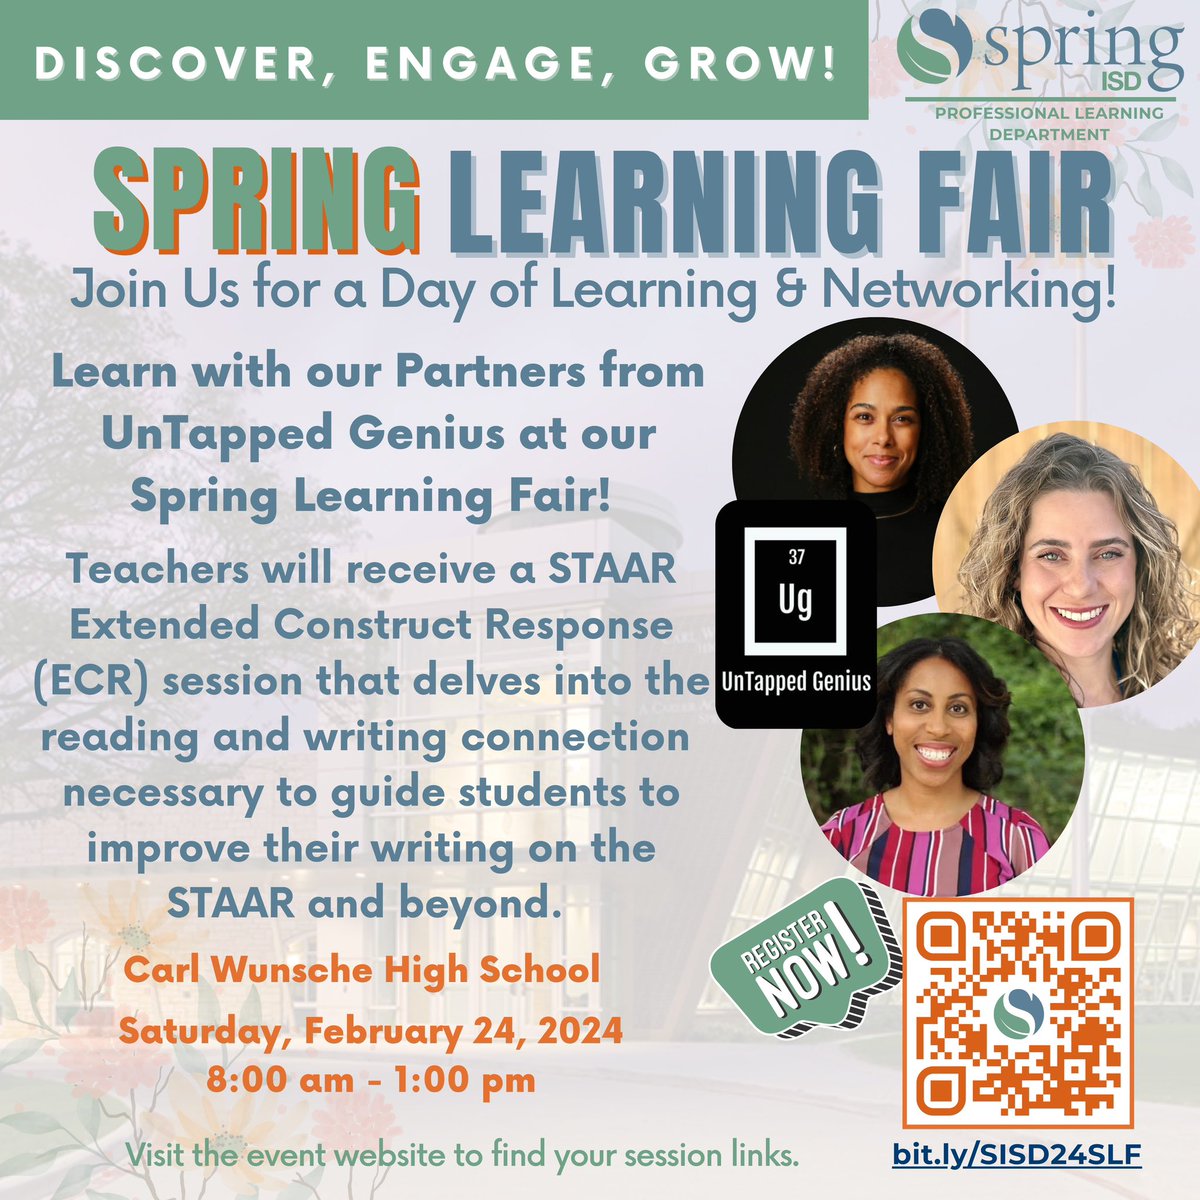 Hey #SpringISD! We’re anxiously awaiting our Saturday learning sessions with y’all! It’s not too late to register, we are holding two dynamic sessions on Tapping into the ECR! @SISD_TheForce #SpringISD #ECR #STAAR